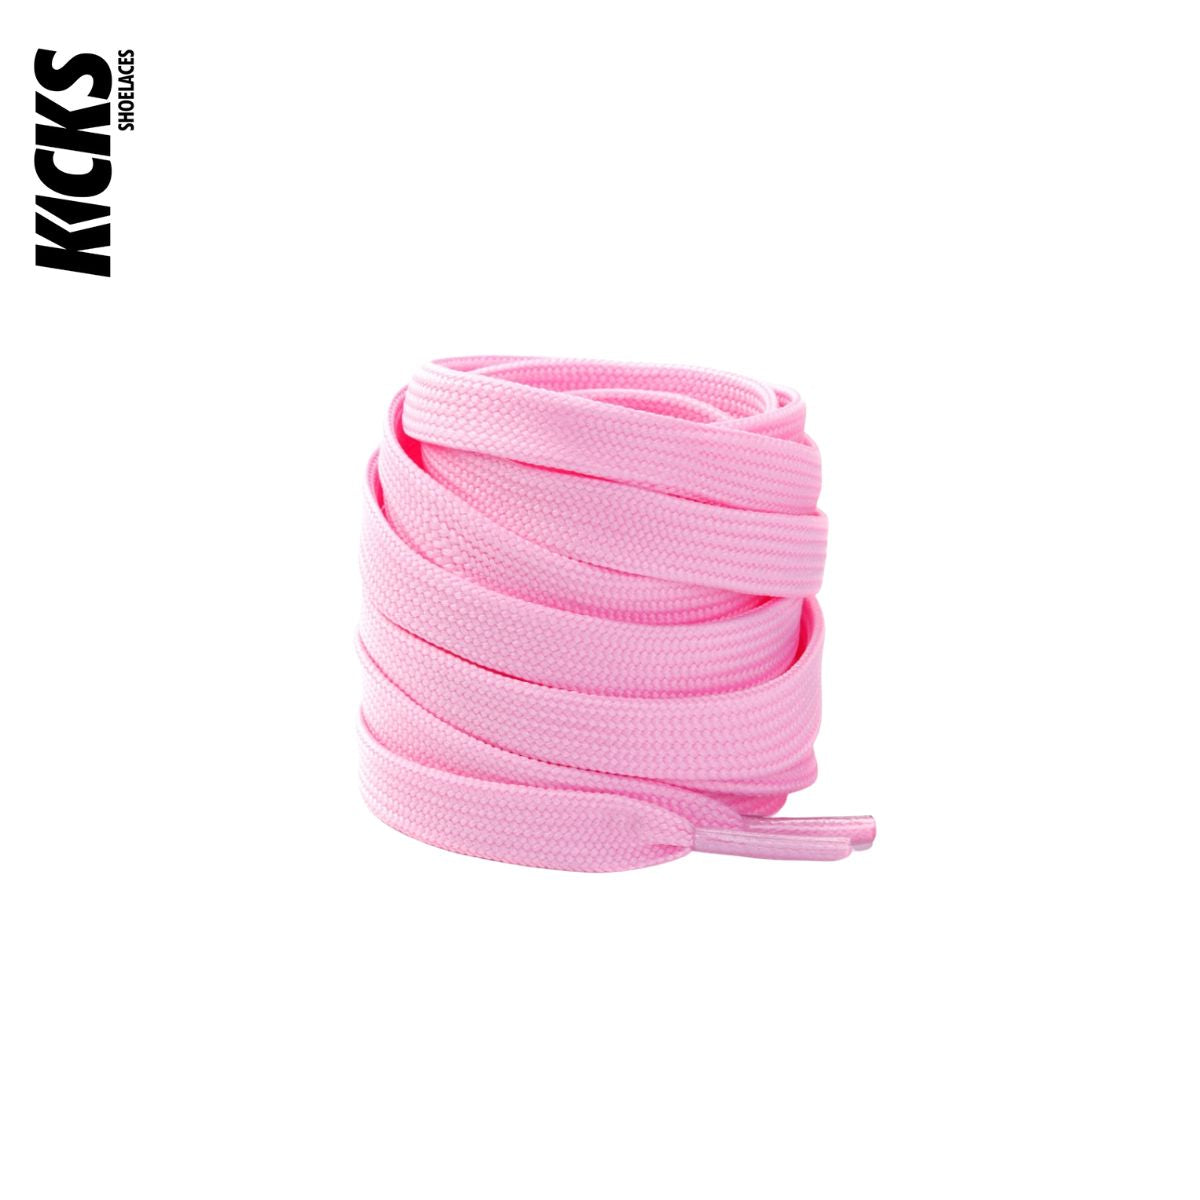 Pink Nike Dunks Shoelace Replacements - Kicks Shoelaces